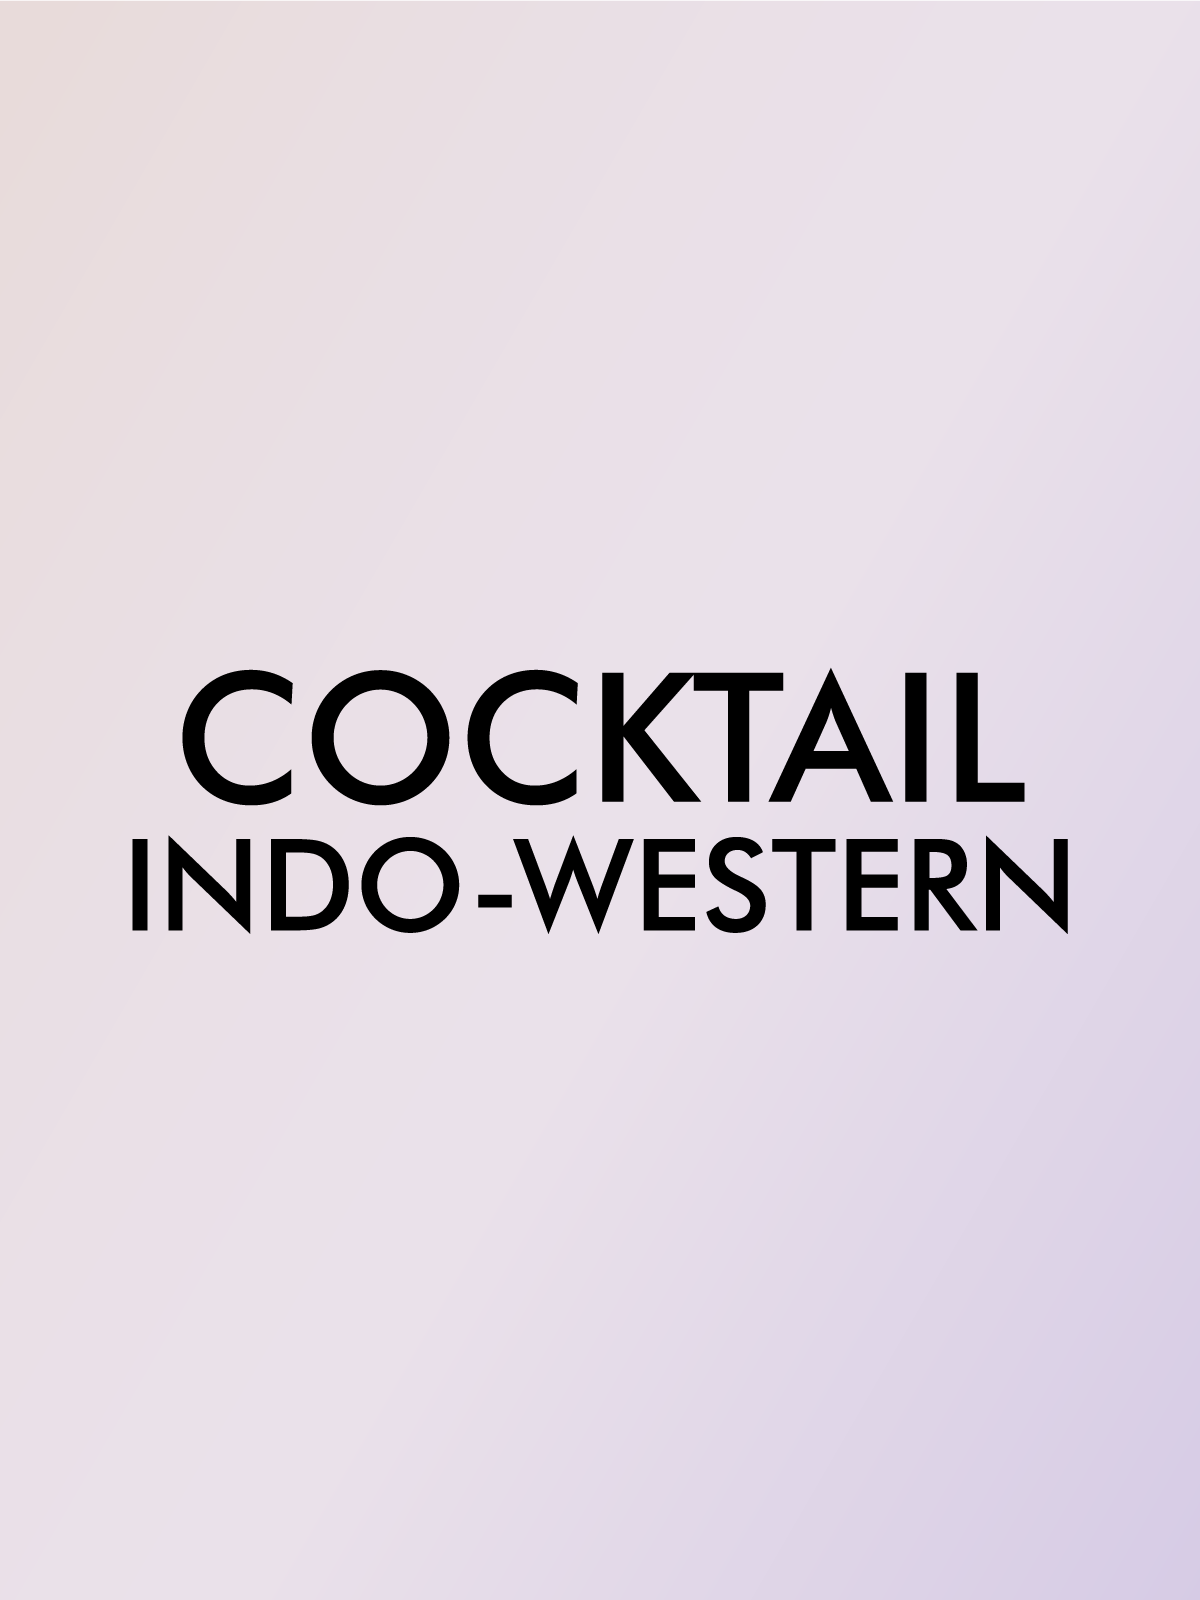 COCKTAIL INDO-WESTERN